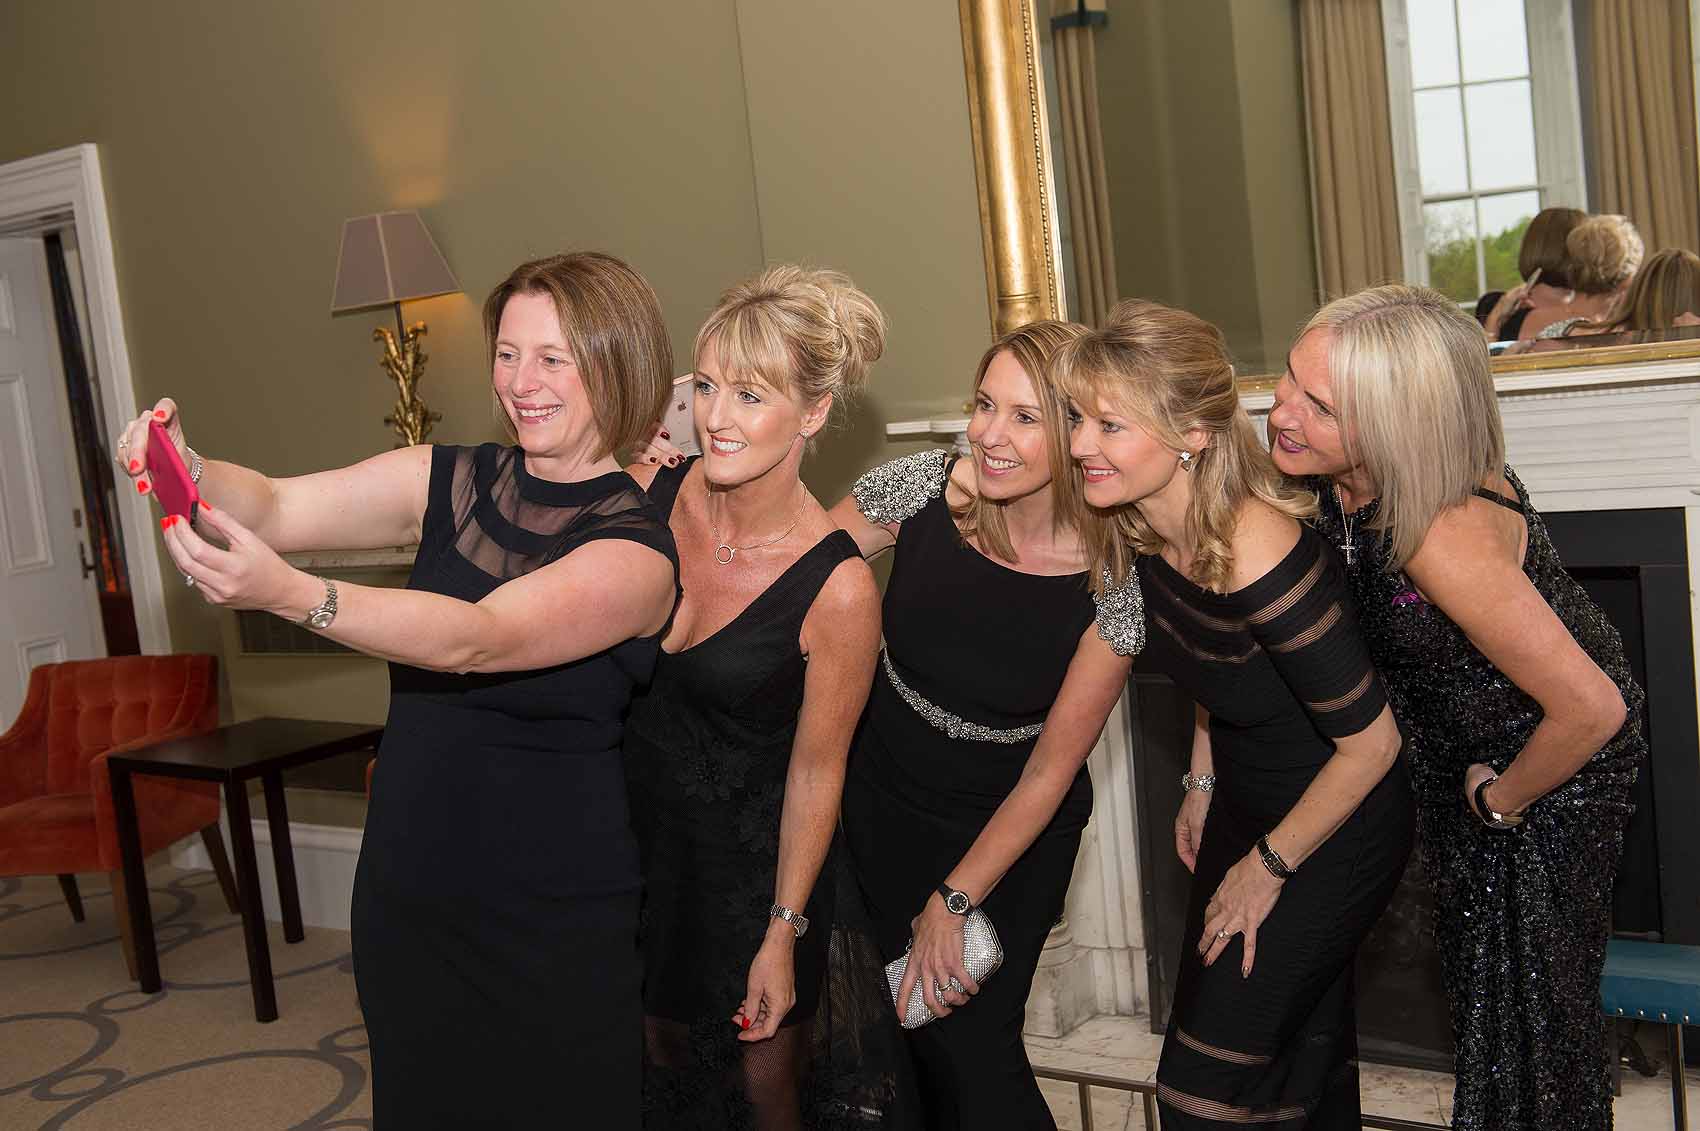 Martin House Hospice Care for Children and Young People held its annual Glitter Ball